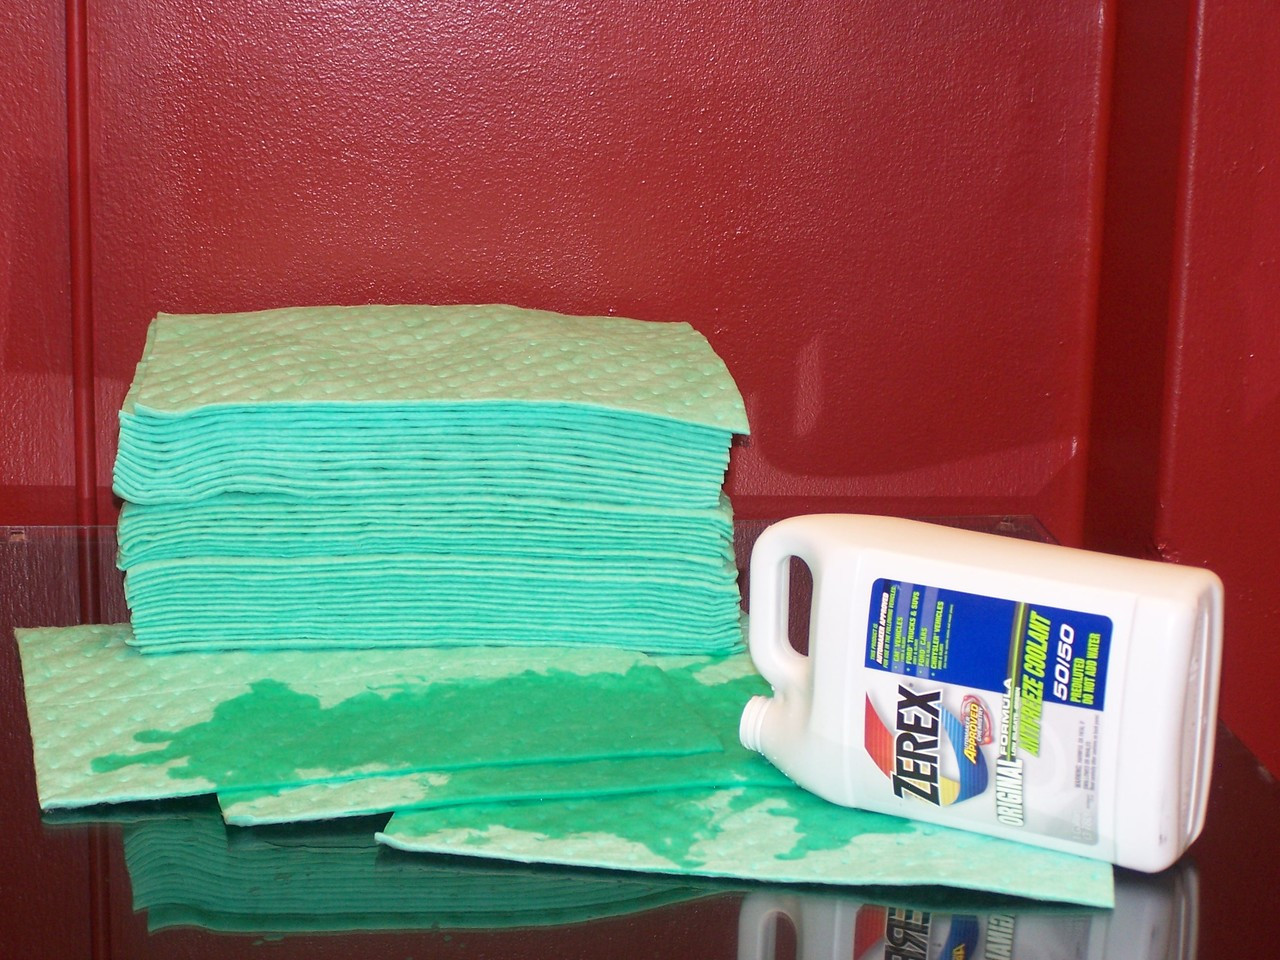 Anti-Freeze (Glycol) Bonded Absorbent Pads - (100ct/box)